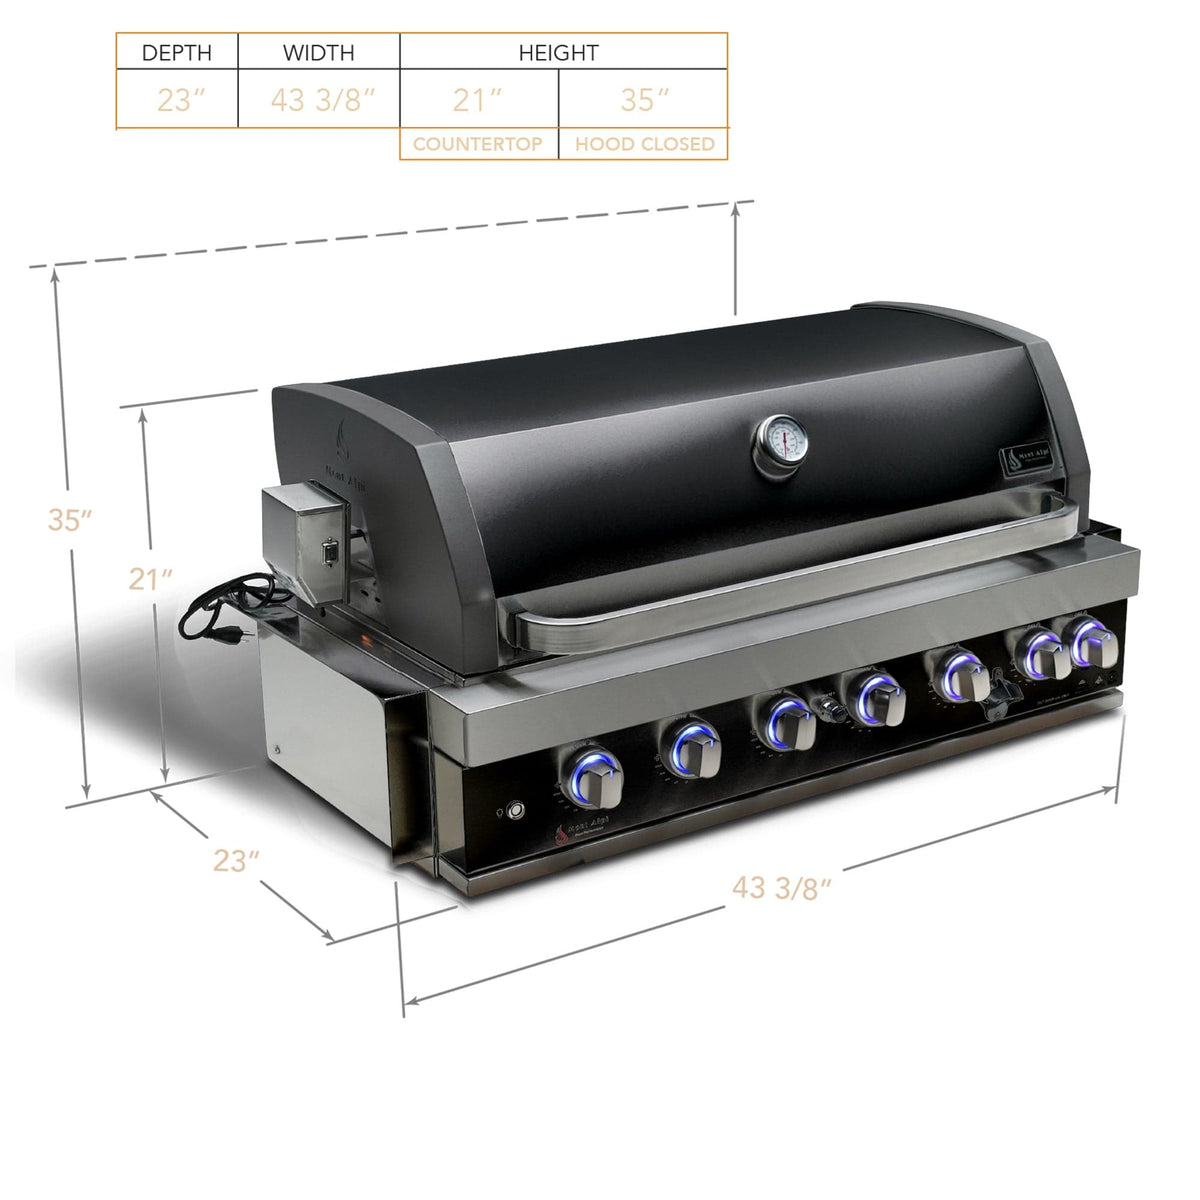 Mont Alpi Grills Mont Alpi 805 Black Stainless Steel Built-In Gas Grill / 6-Burner Grill, Infrared Back Burner, Black Stainless Steel, Rotisserie Kit / MABi805-BSS